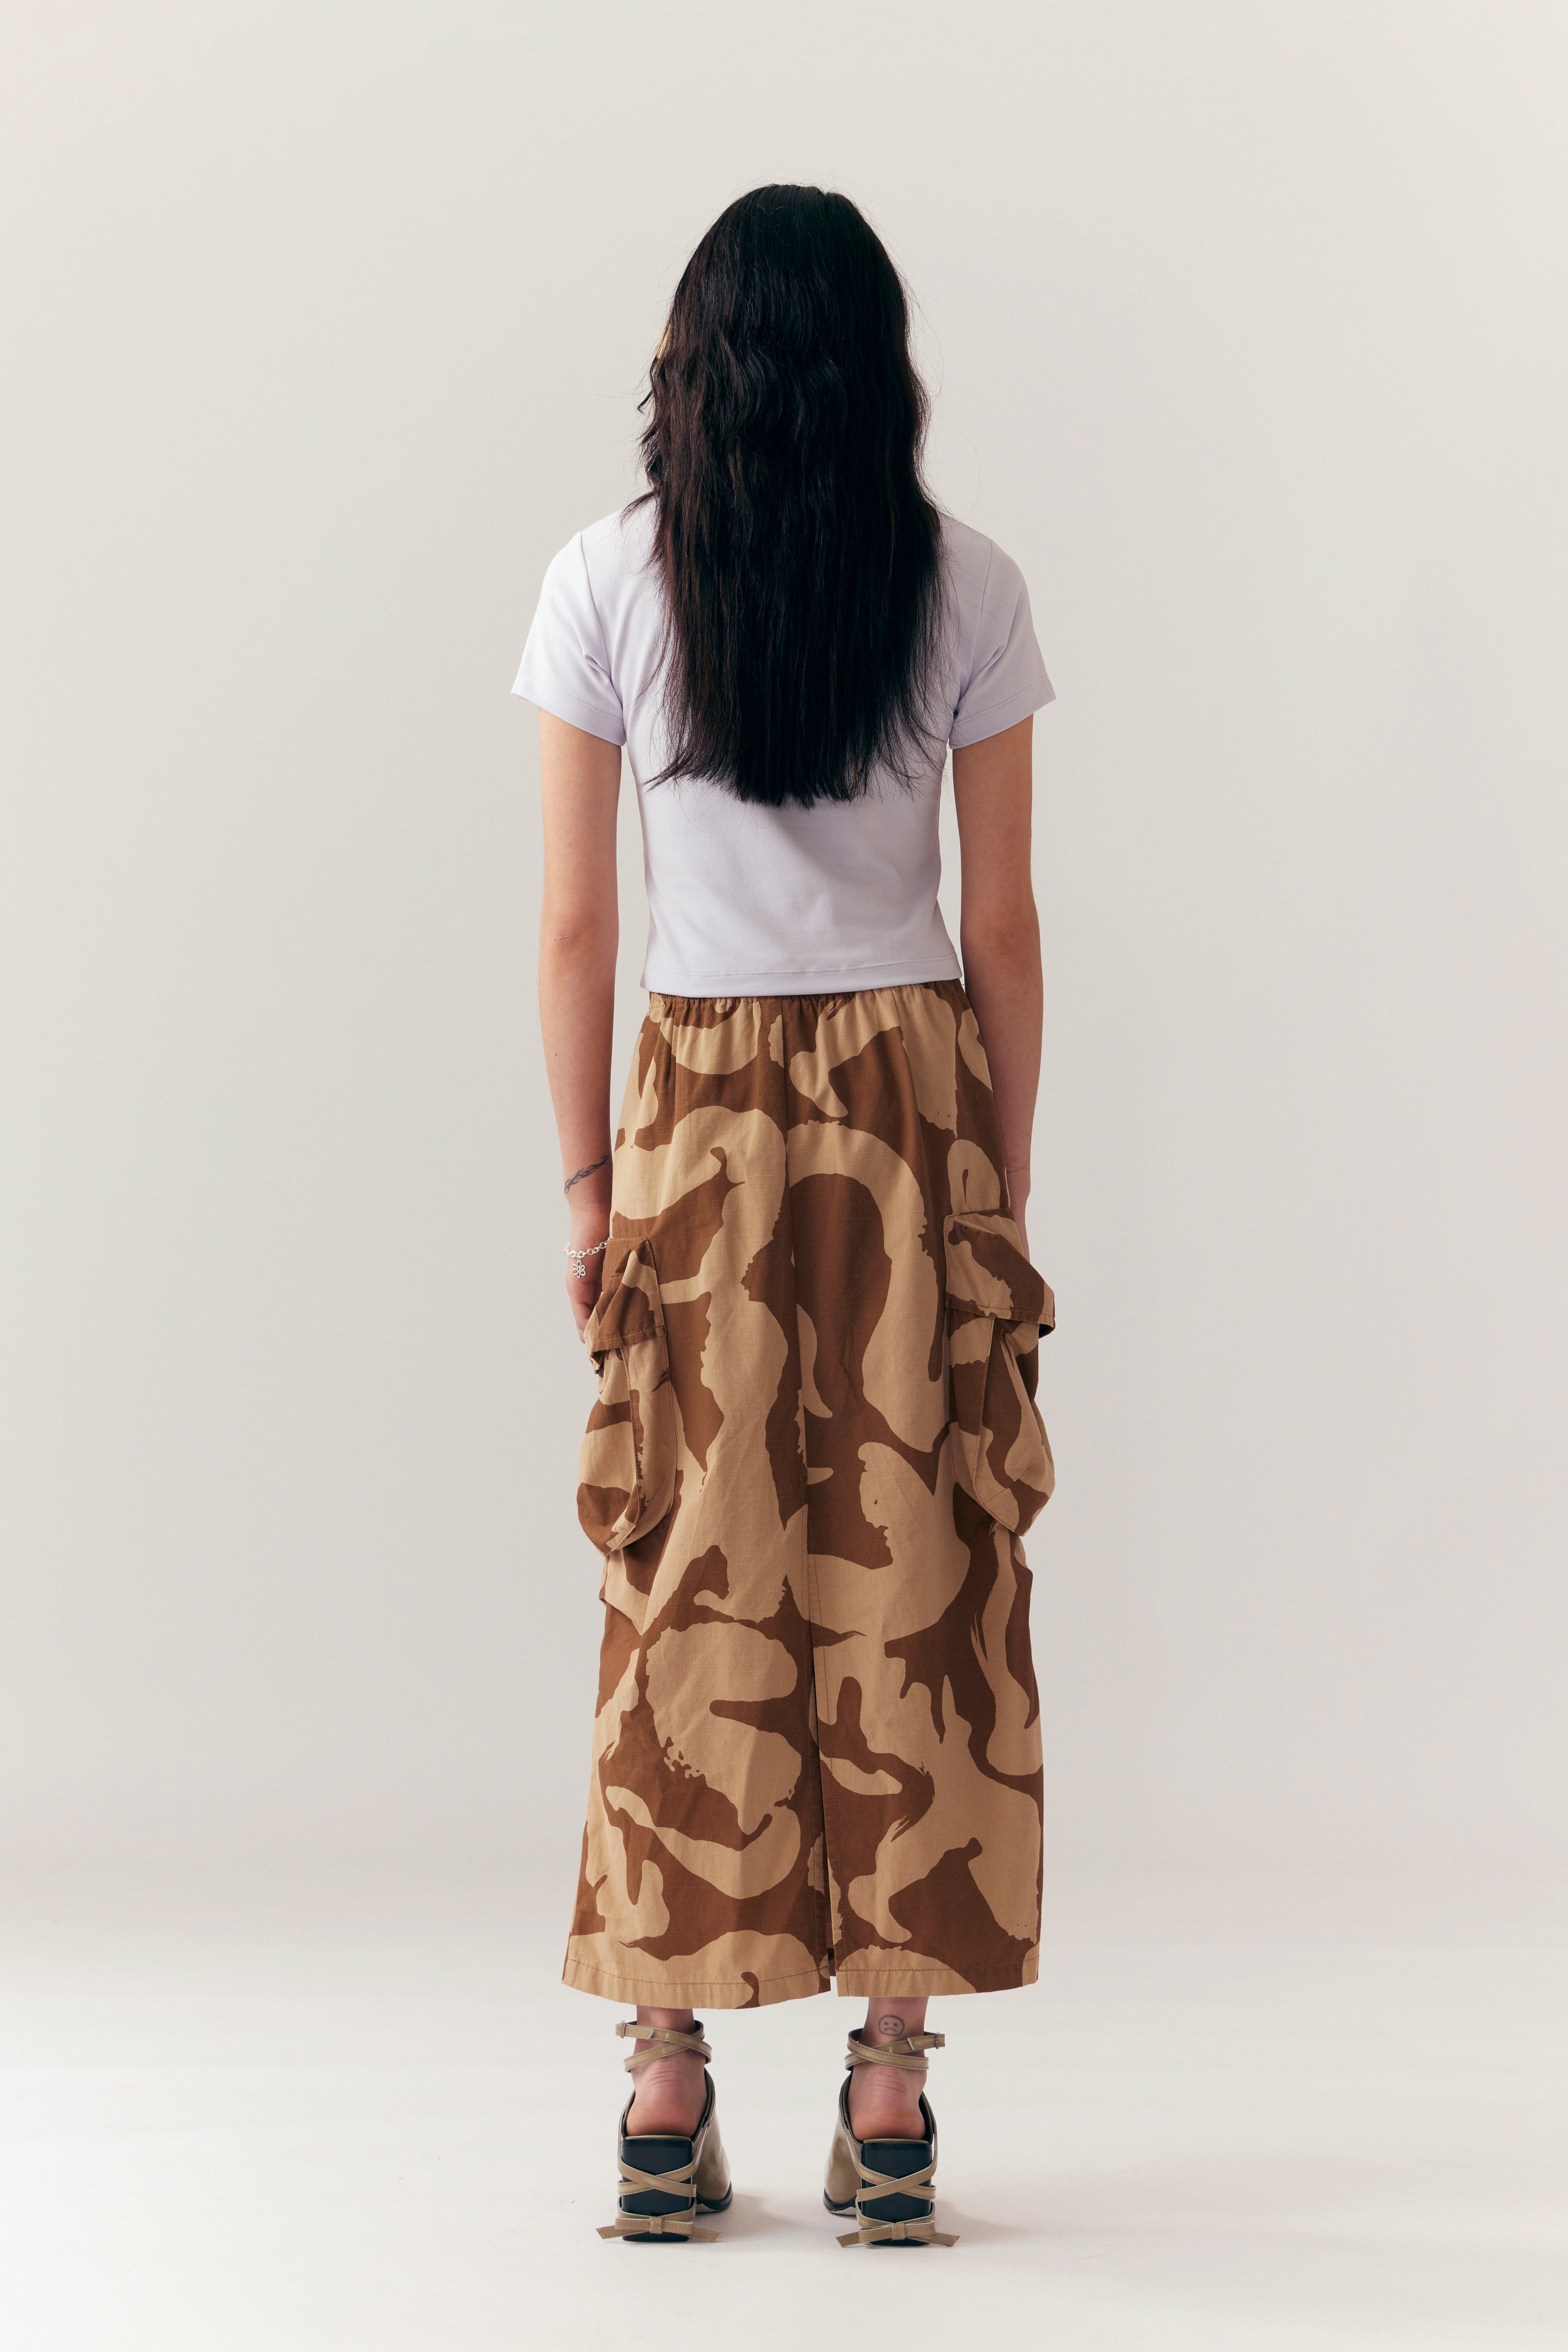 The LONG CARGO SKIRT  available online with global shipping, and in PAM Stores Melbourne and Sydney.